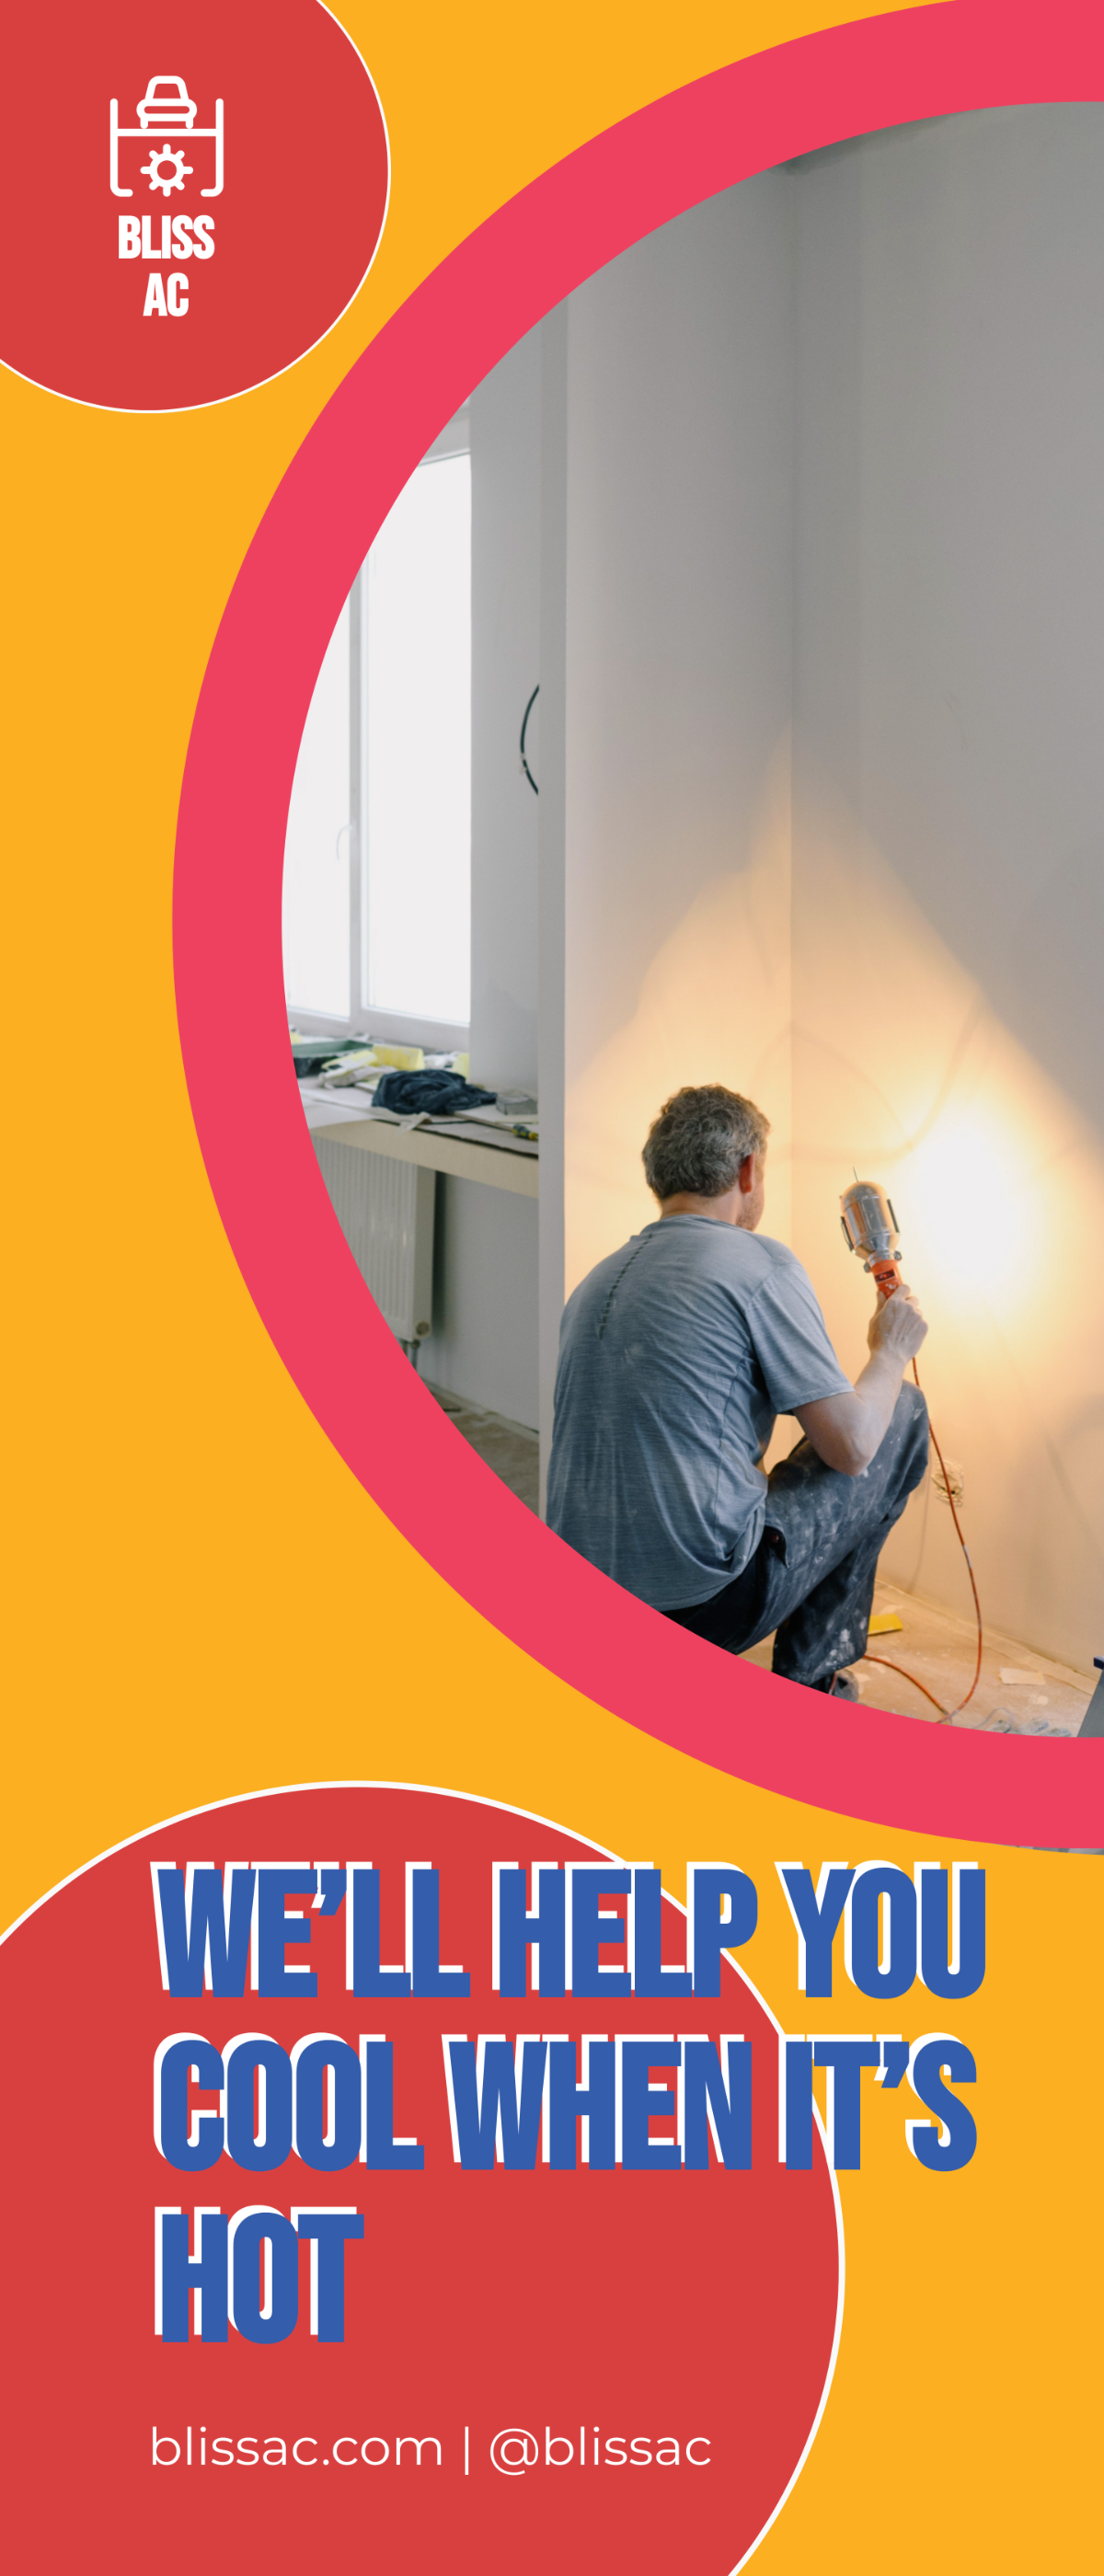 Free Air Conditioner Repair Service Roll-Up Banner Template